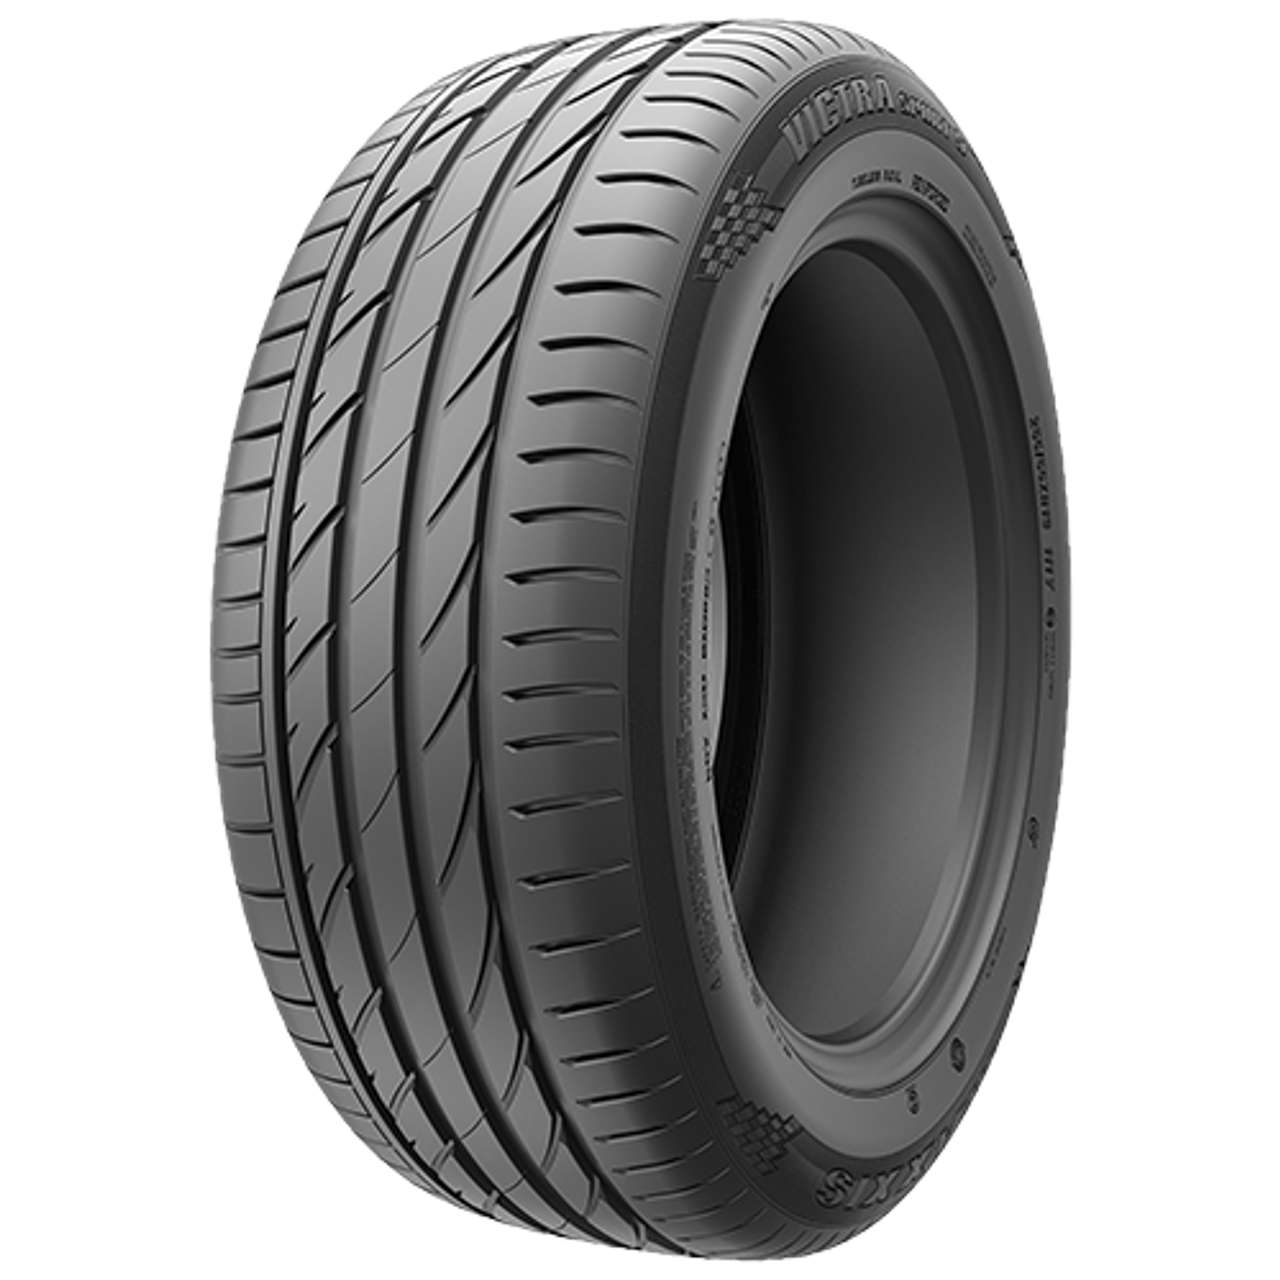 MAXXIS VICTRA SPORT 5 (VS5) 255/55ZR18 109Y BSW